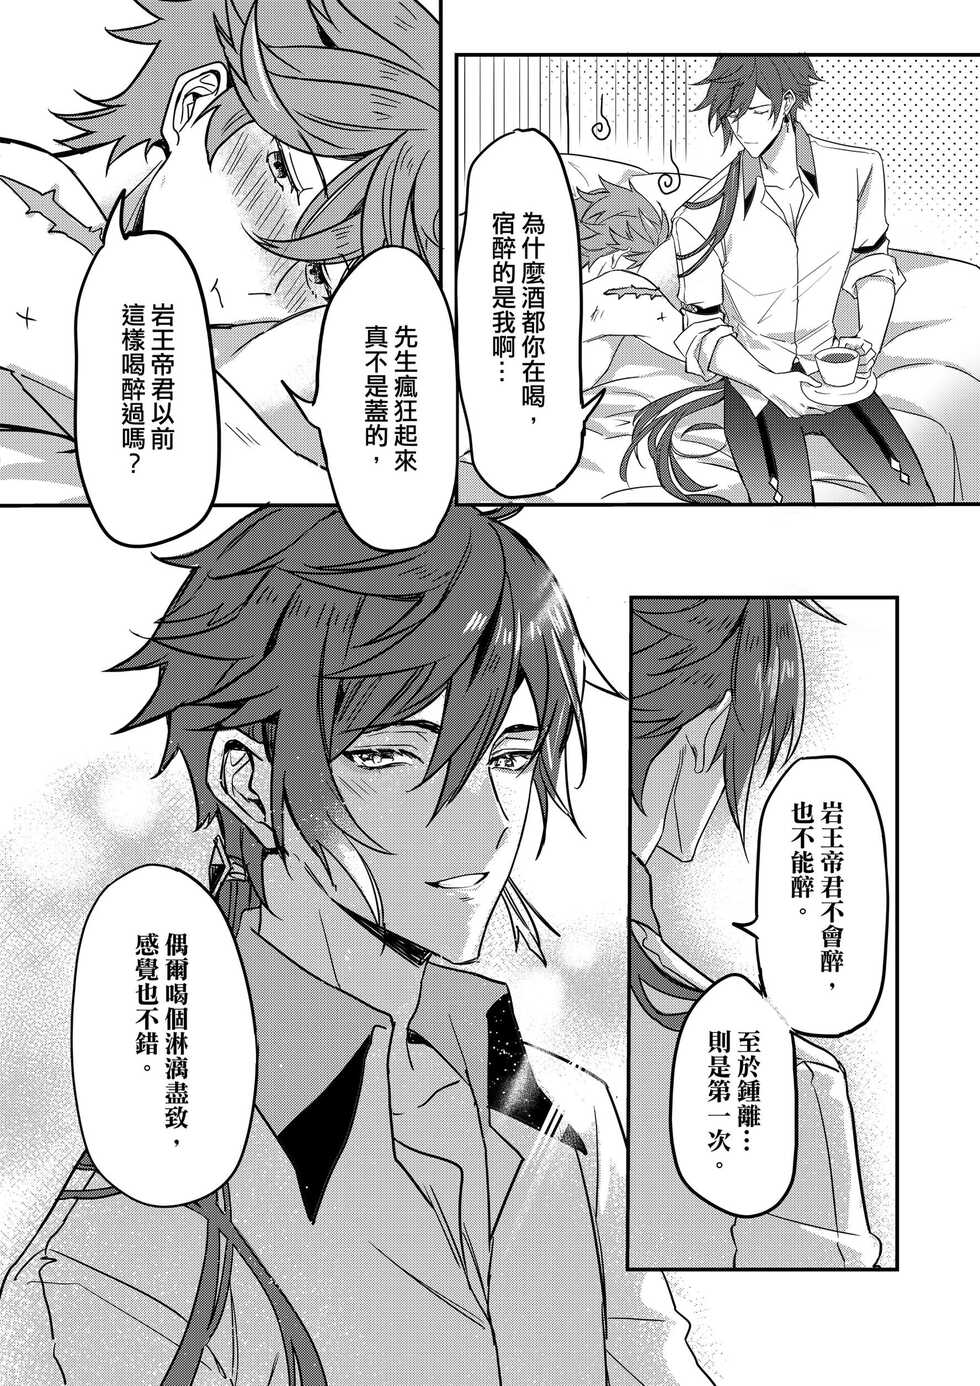 [megumignsn] The Intoxicated Harbinger and Archon (Genshin Impact) [Chinese] - Page 30